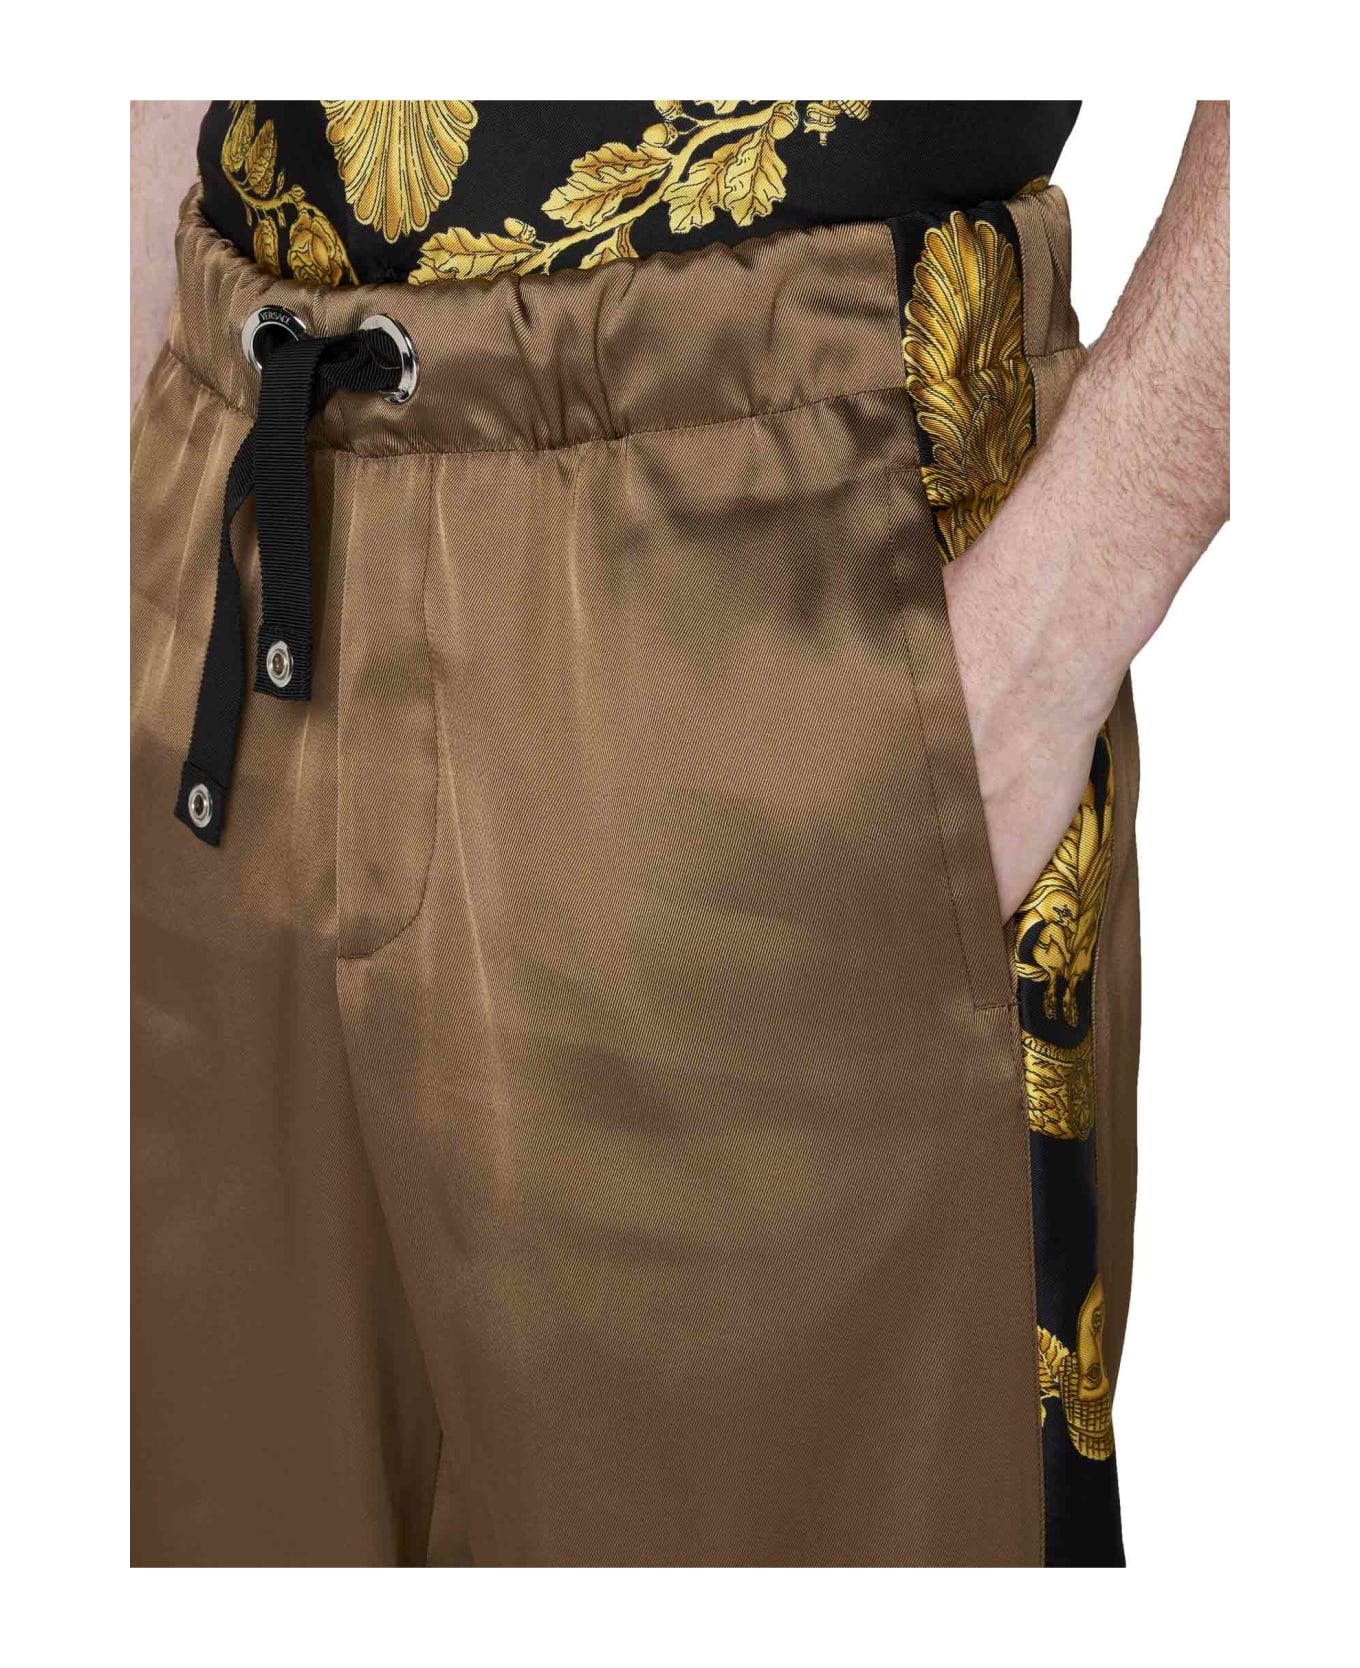 Versace Camel Trousers With Baroque Bands - Brown ボトムス